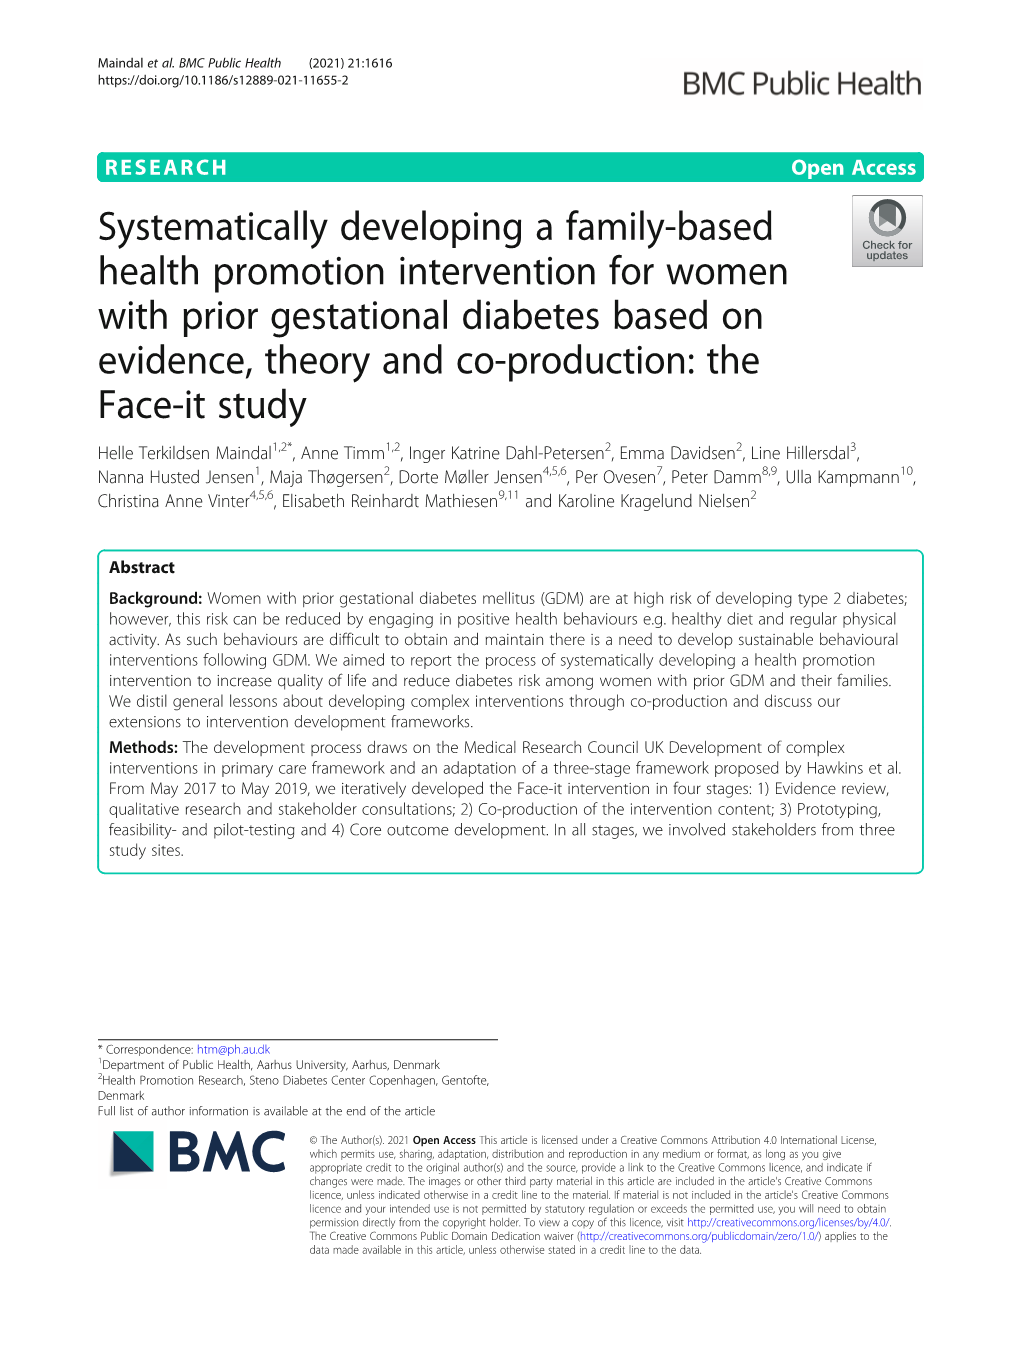 Systematically Developing a Family-Based Health Promotion